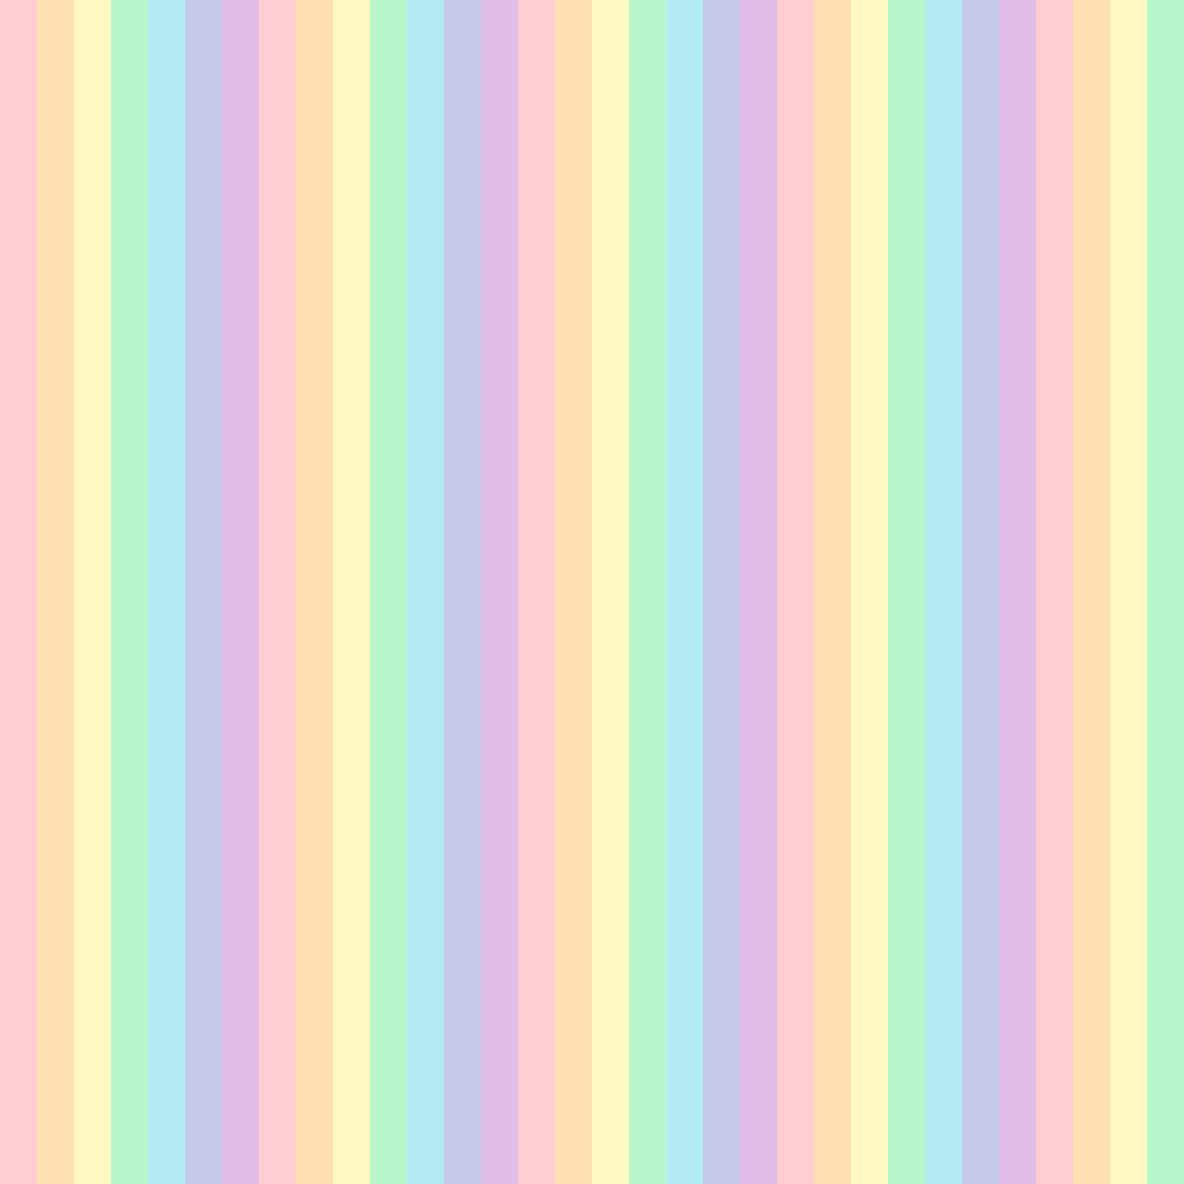 A Colorful Rainbow Gradient Background